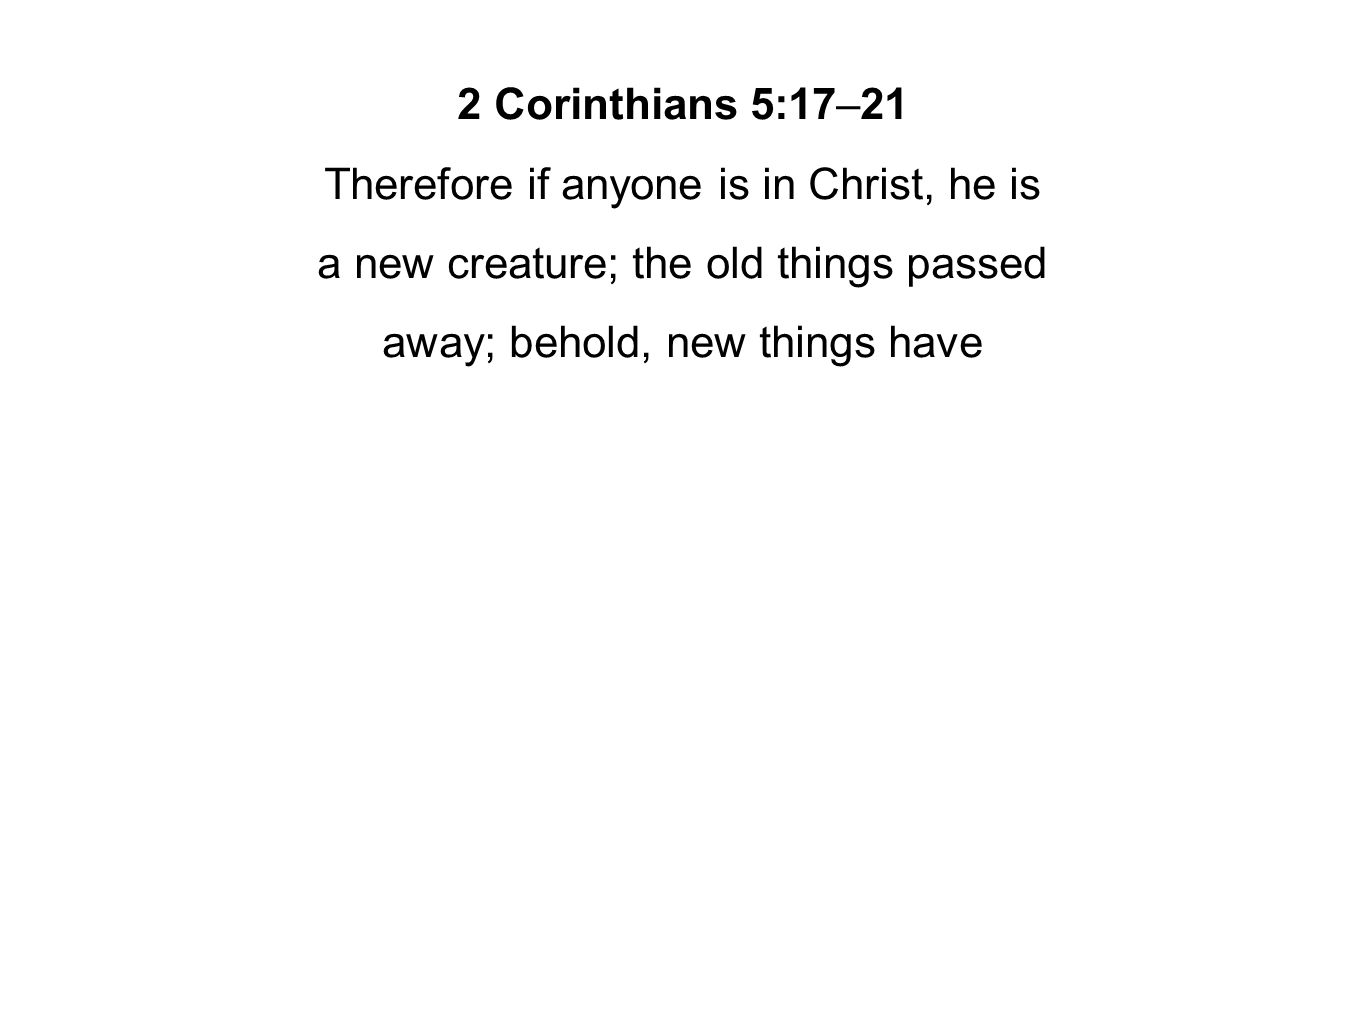 2 Corinthians 5:17–21 Therefore if anyone is in Christ, he is a new creature; the old things passed away; behold, new things have